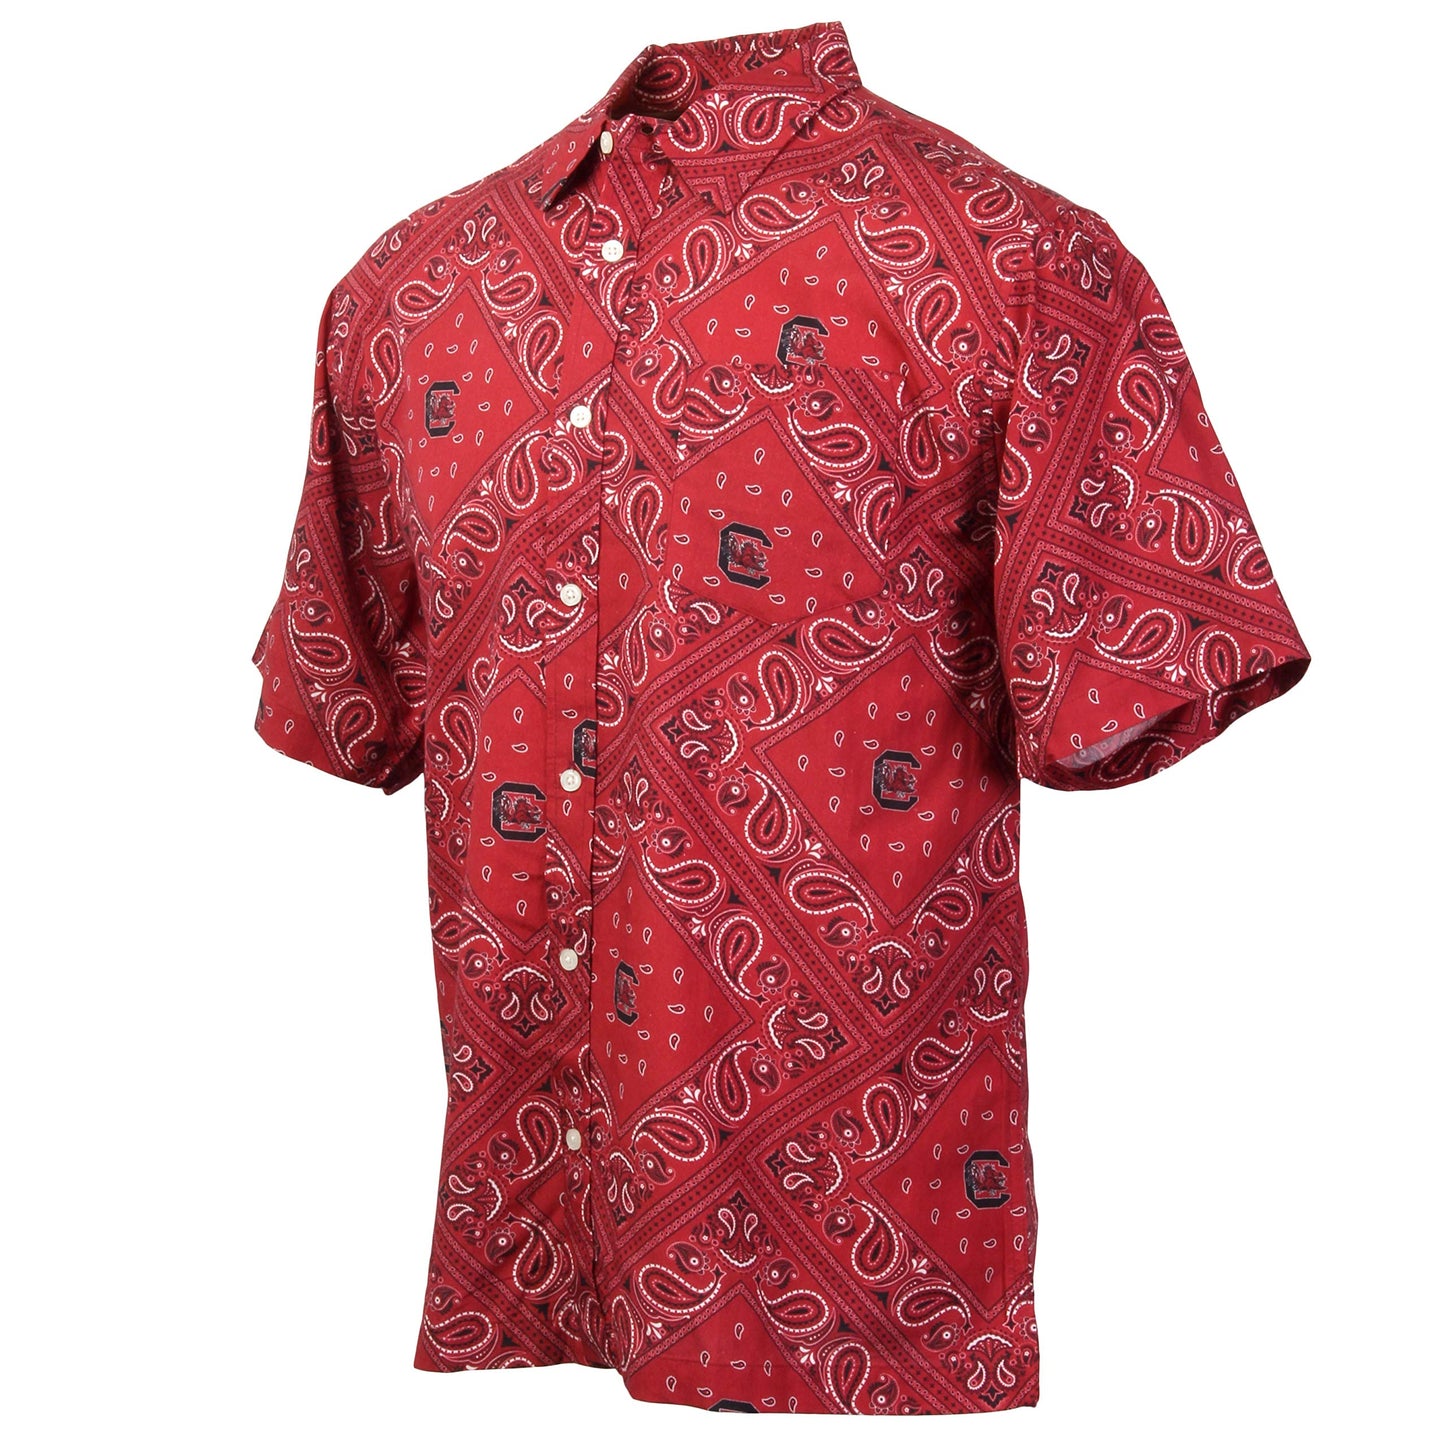 South Carolina Gamecocks Wes and Willy Mens College Paisley Button Up Shirt